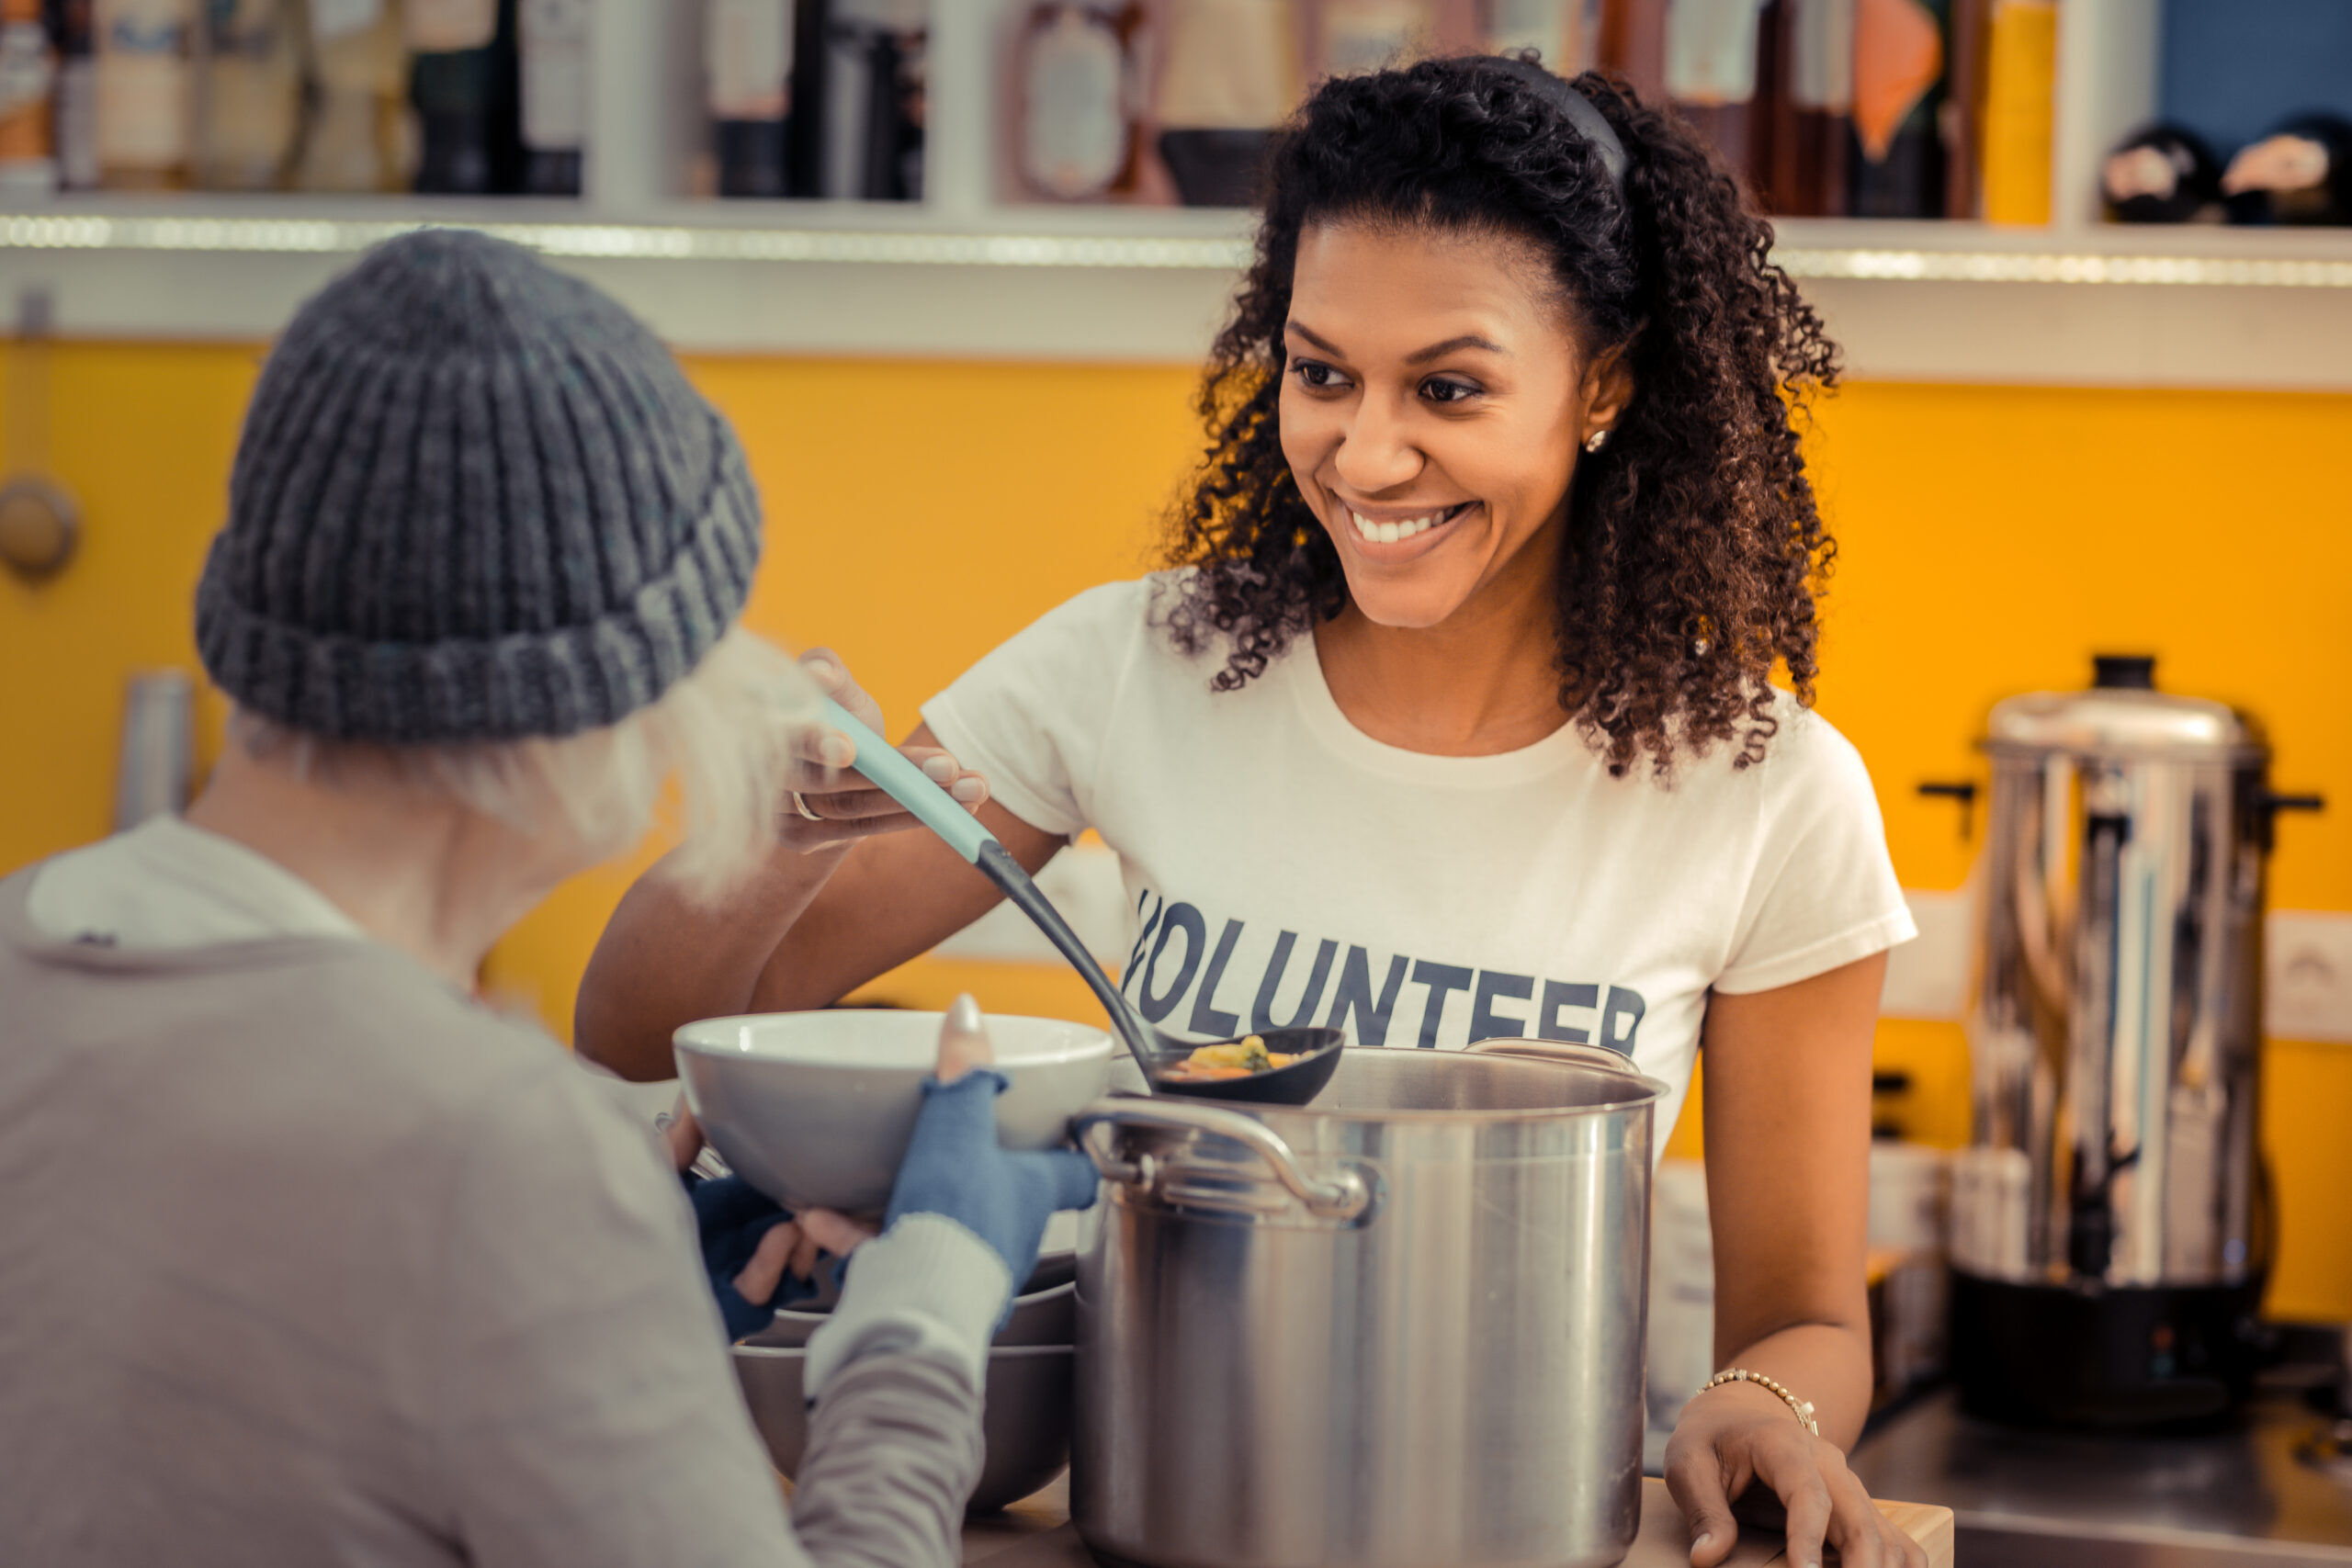 Can you lend a hand? 9 meaningful ways to volunteer for your community